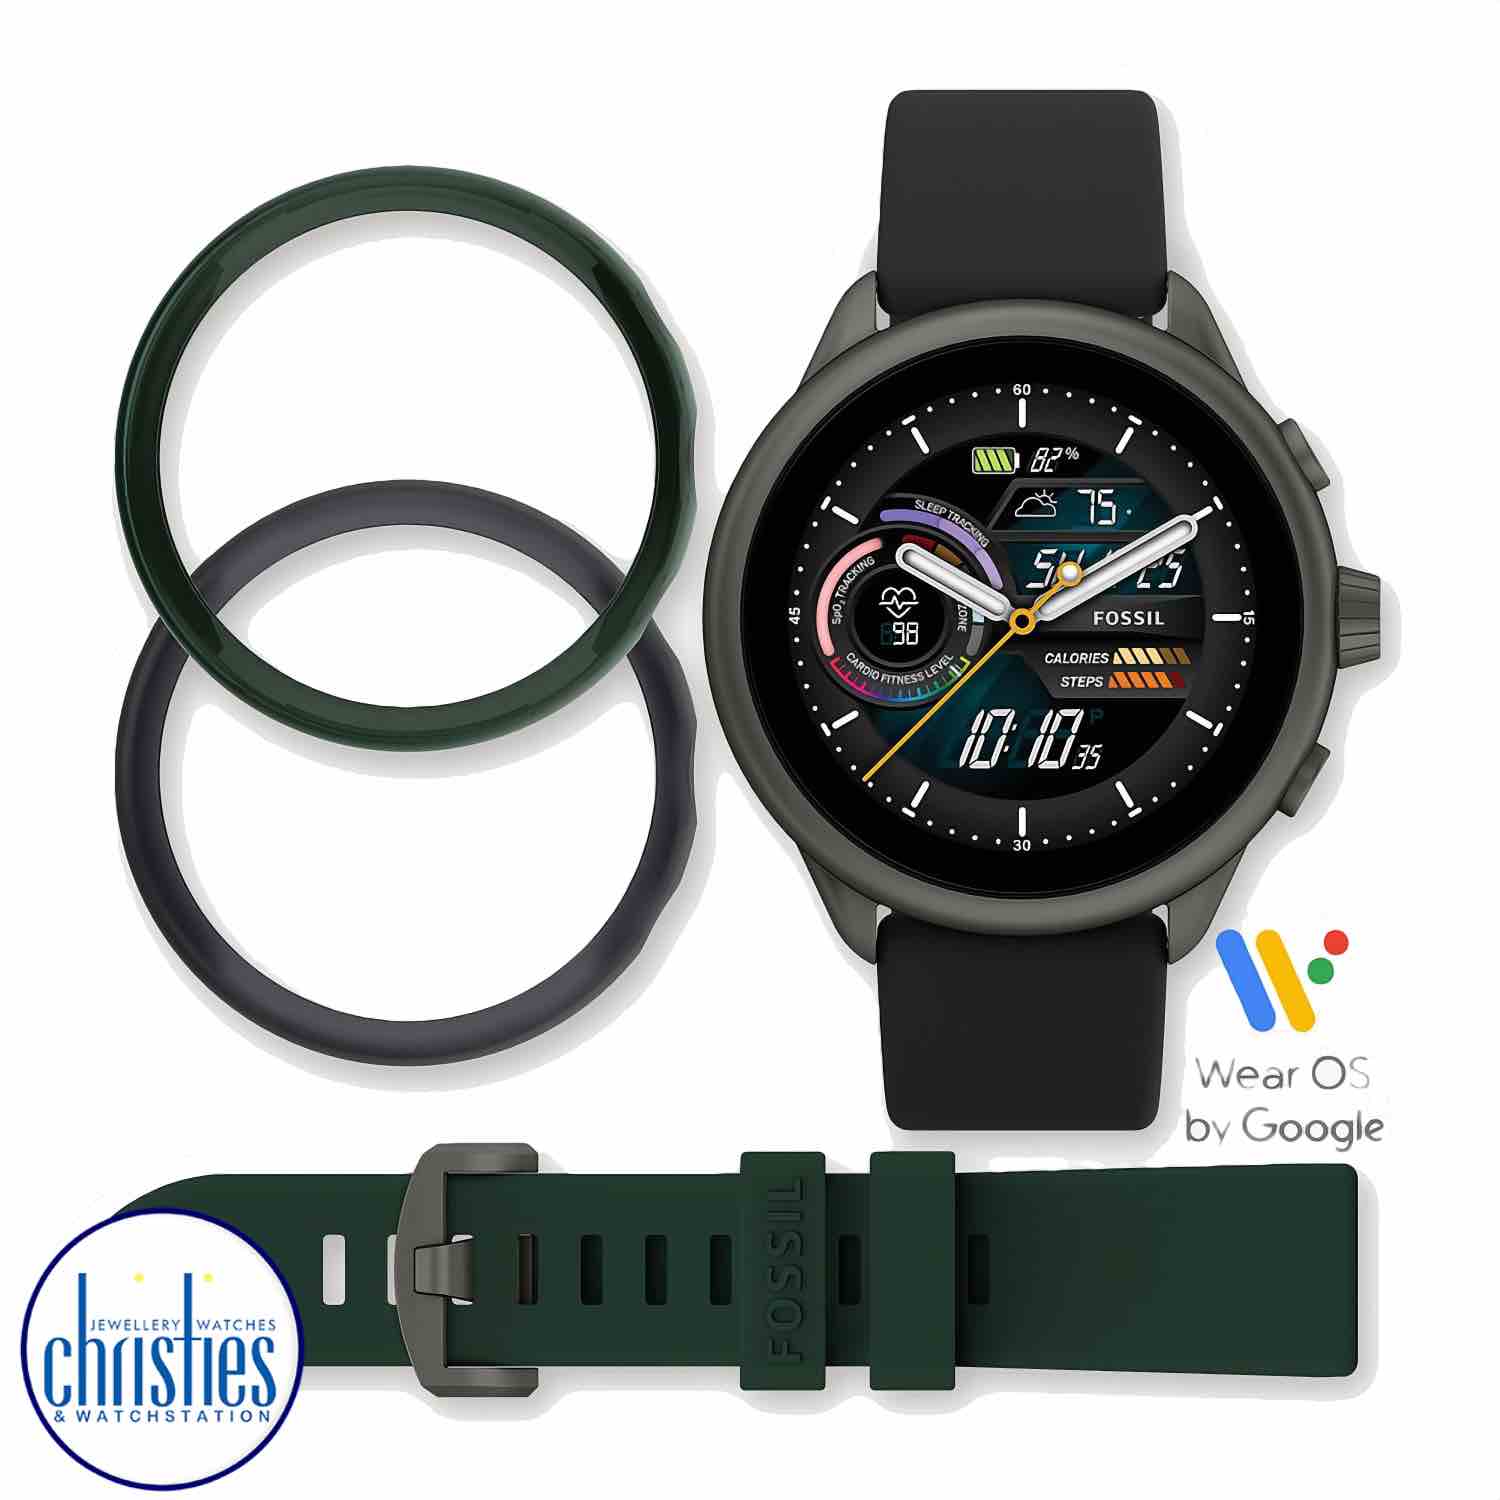 FTW4072SET Fossil Gen 6 Wellness Edition Smartwatch Black Silicone and Interchangeable Strap and Bumper Set. FTW4072SET Fossil Gen 6 Wellness Edition Smartwatch Black Silicone and Interchangeable Strap and Bumper Set. fossil mens watches nz